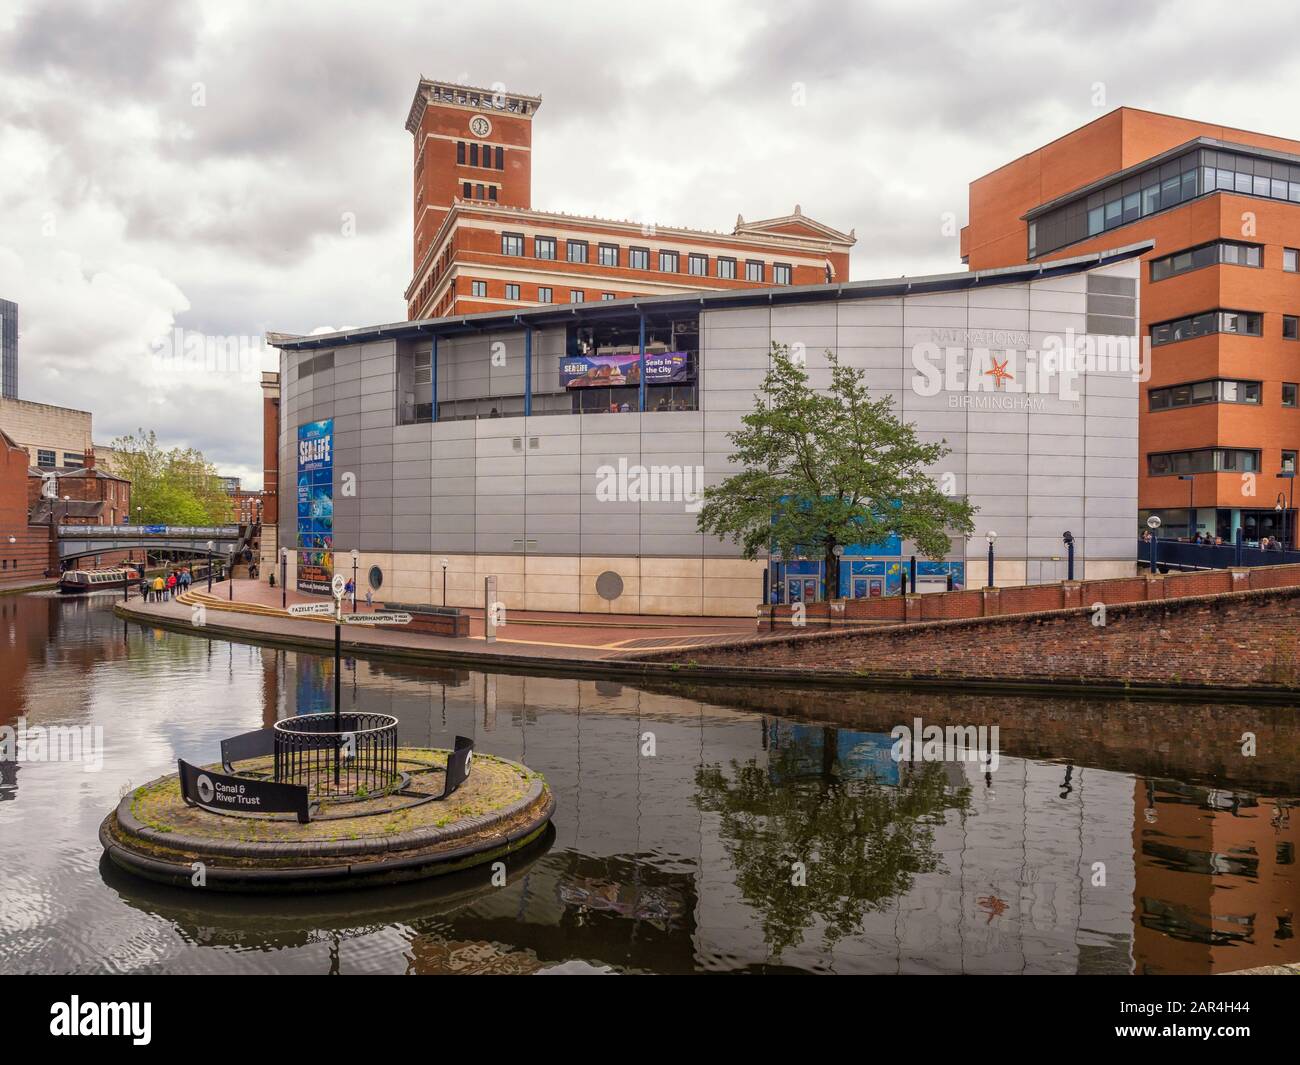 BIRMINGHAM, UK -MAY 28, 2019: view of the National Sea Life Centre aquarium in Brindley Place Stock Photo